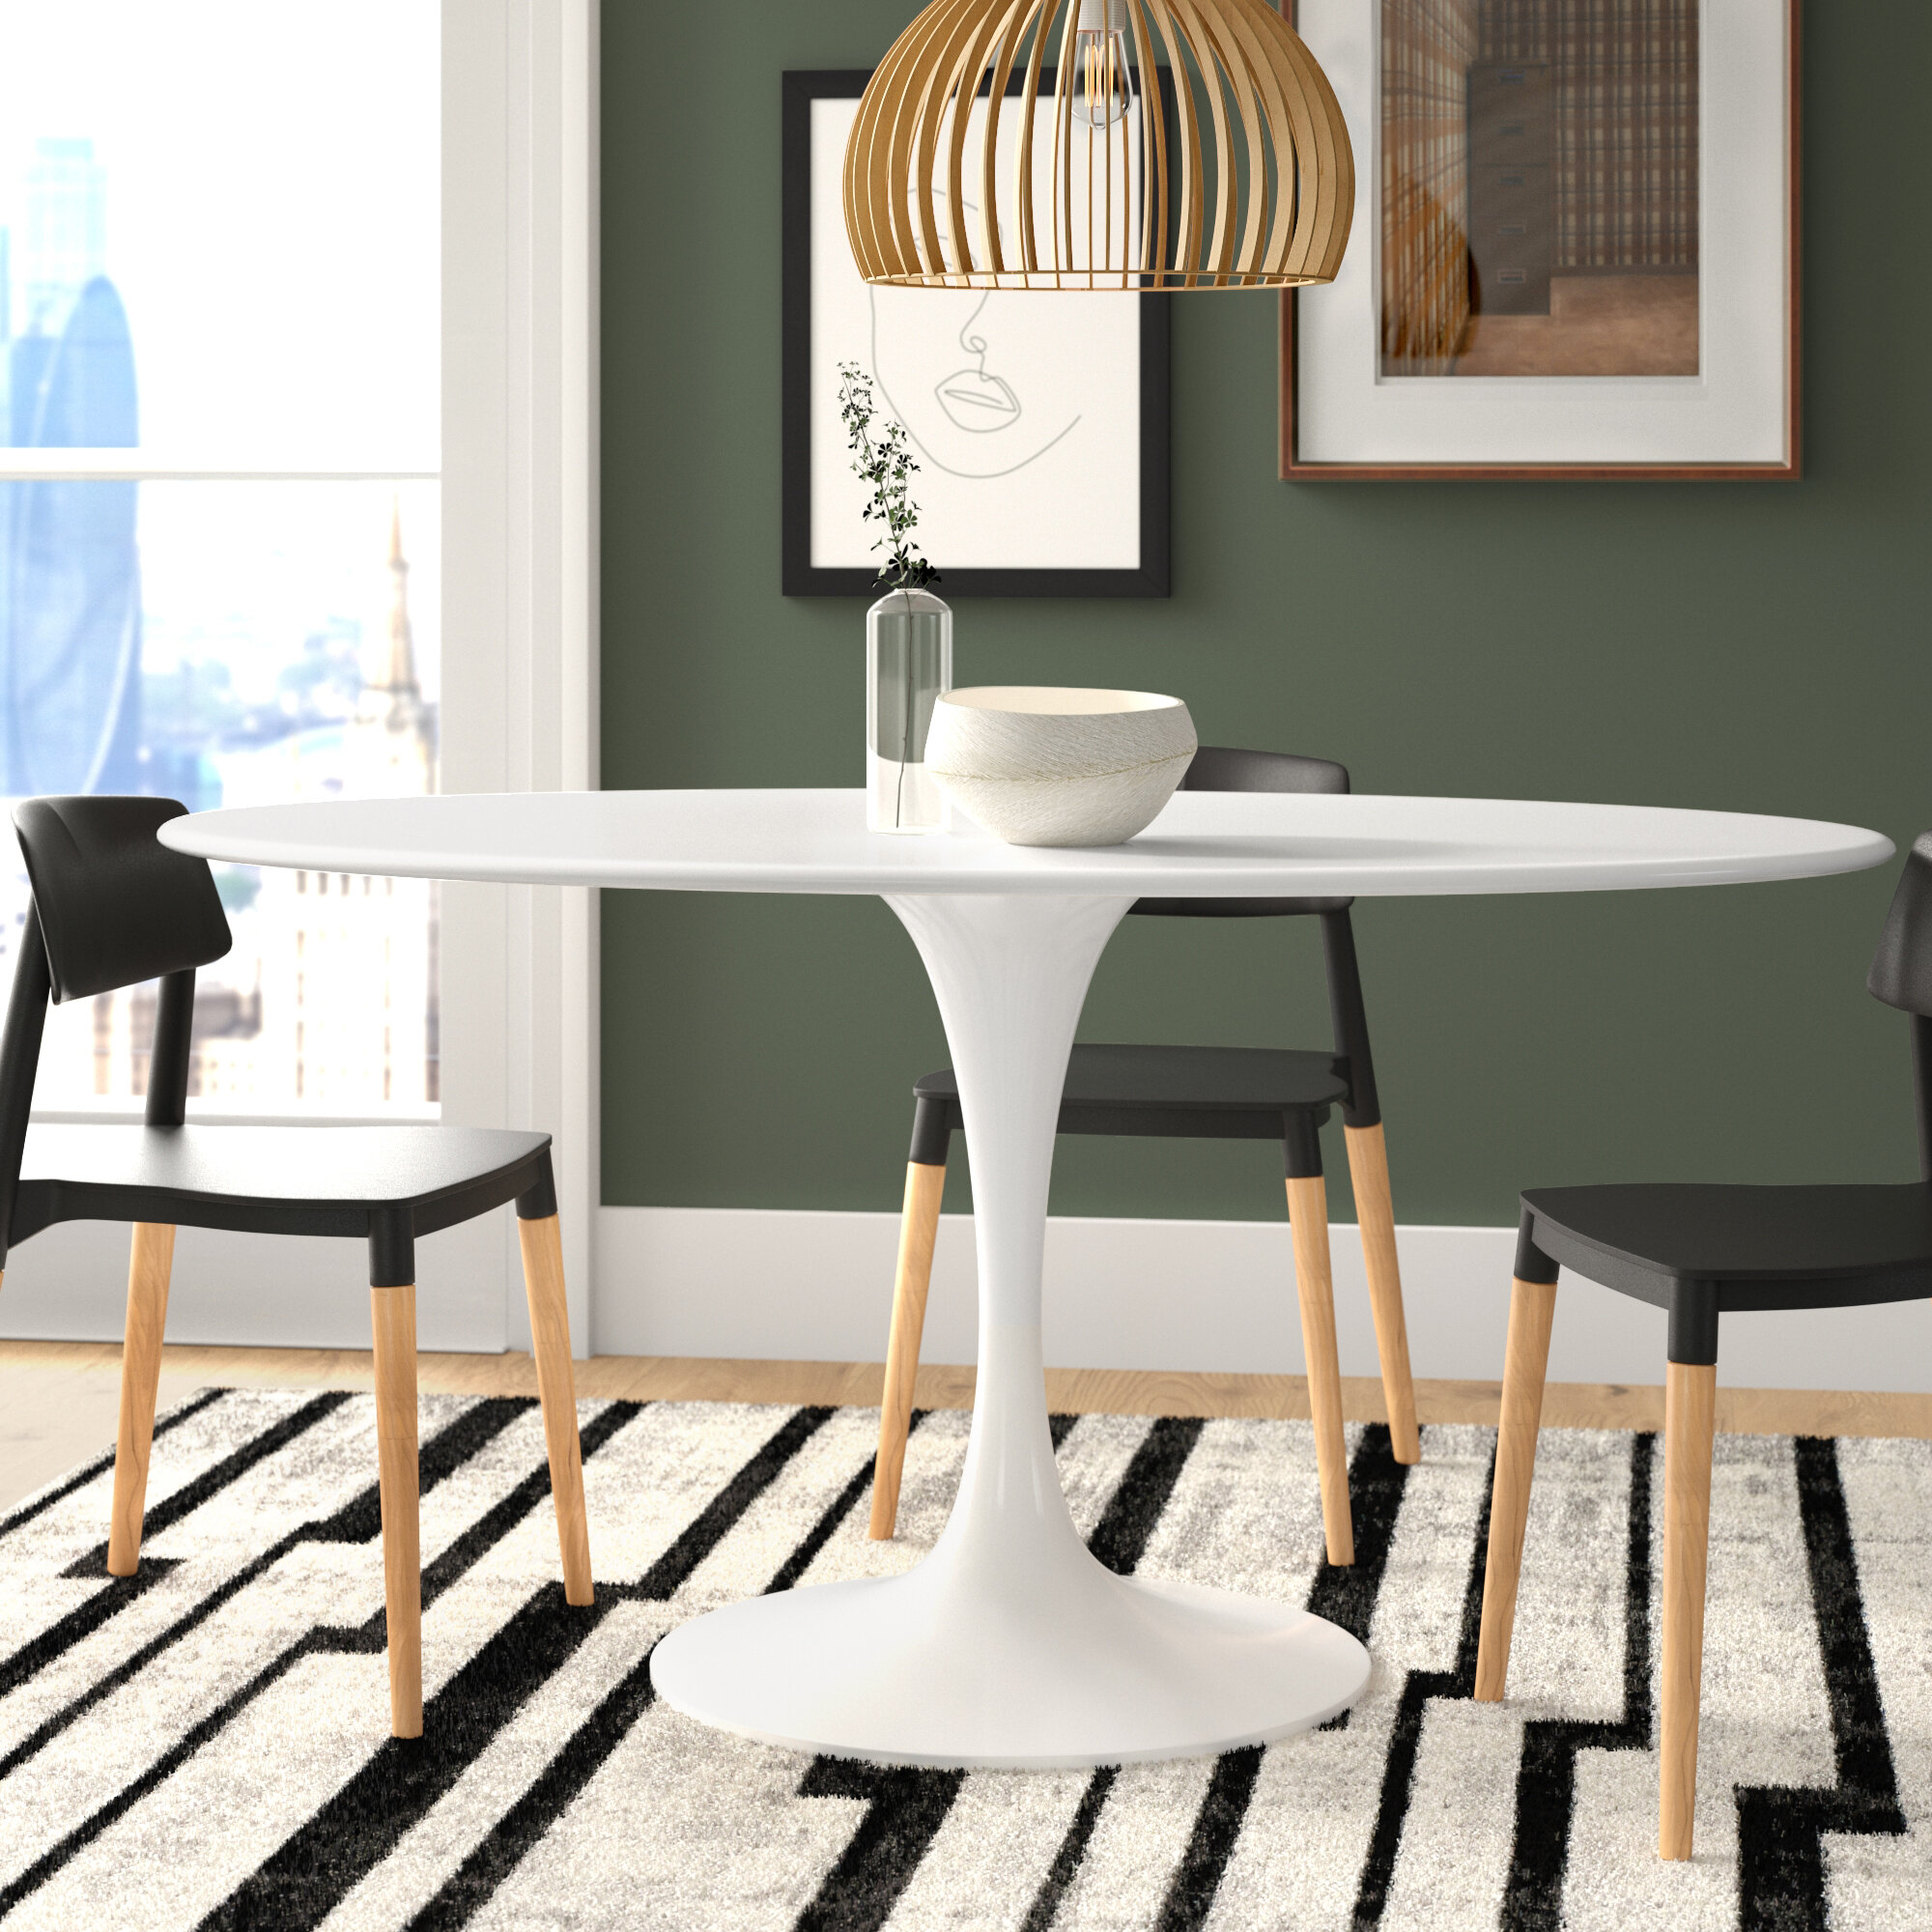 Wayfair | Oval White Kitchen & Dining Tables You'll Love in 2022